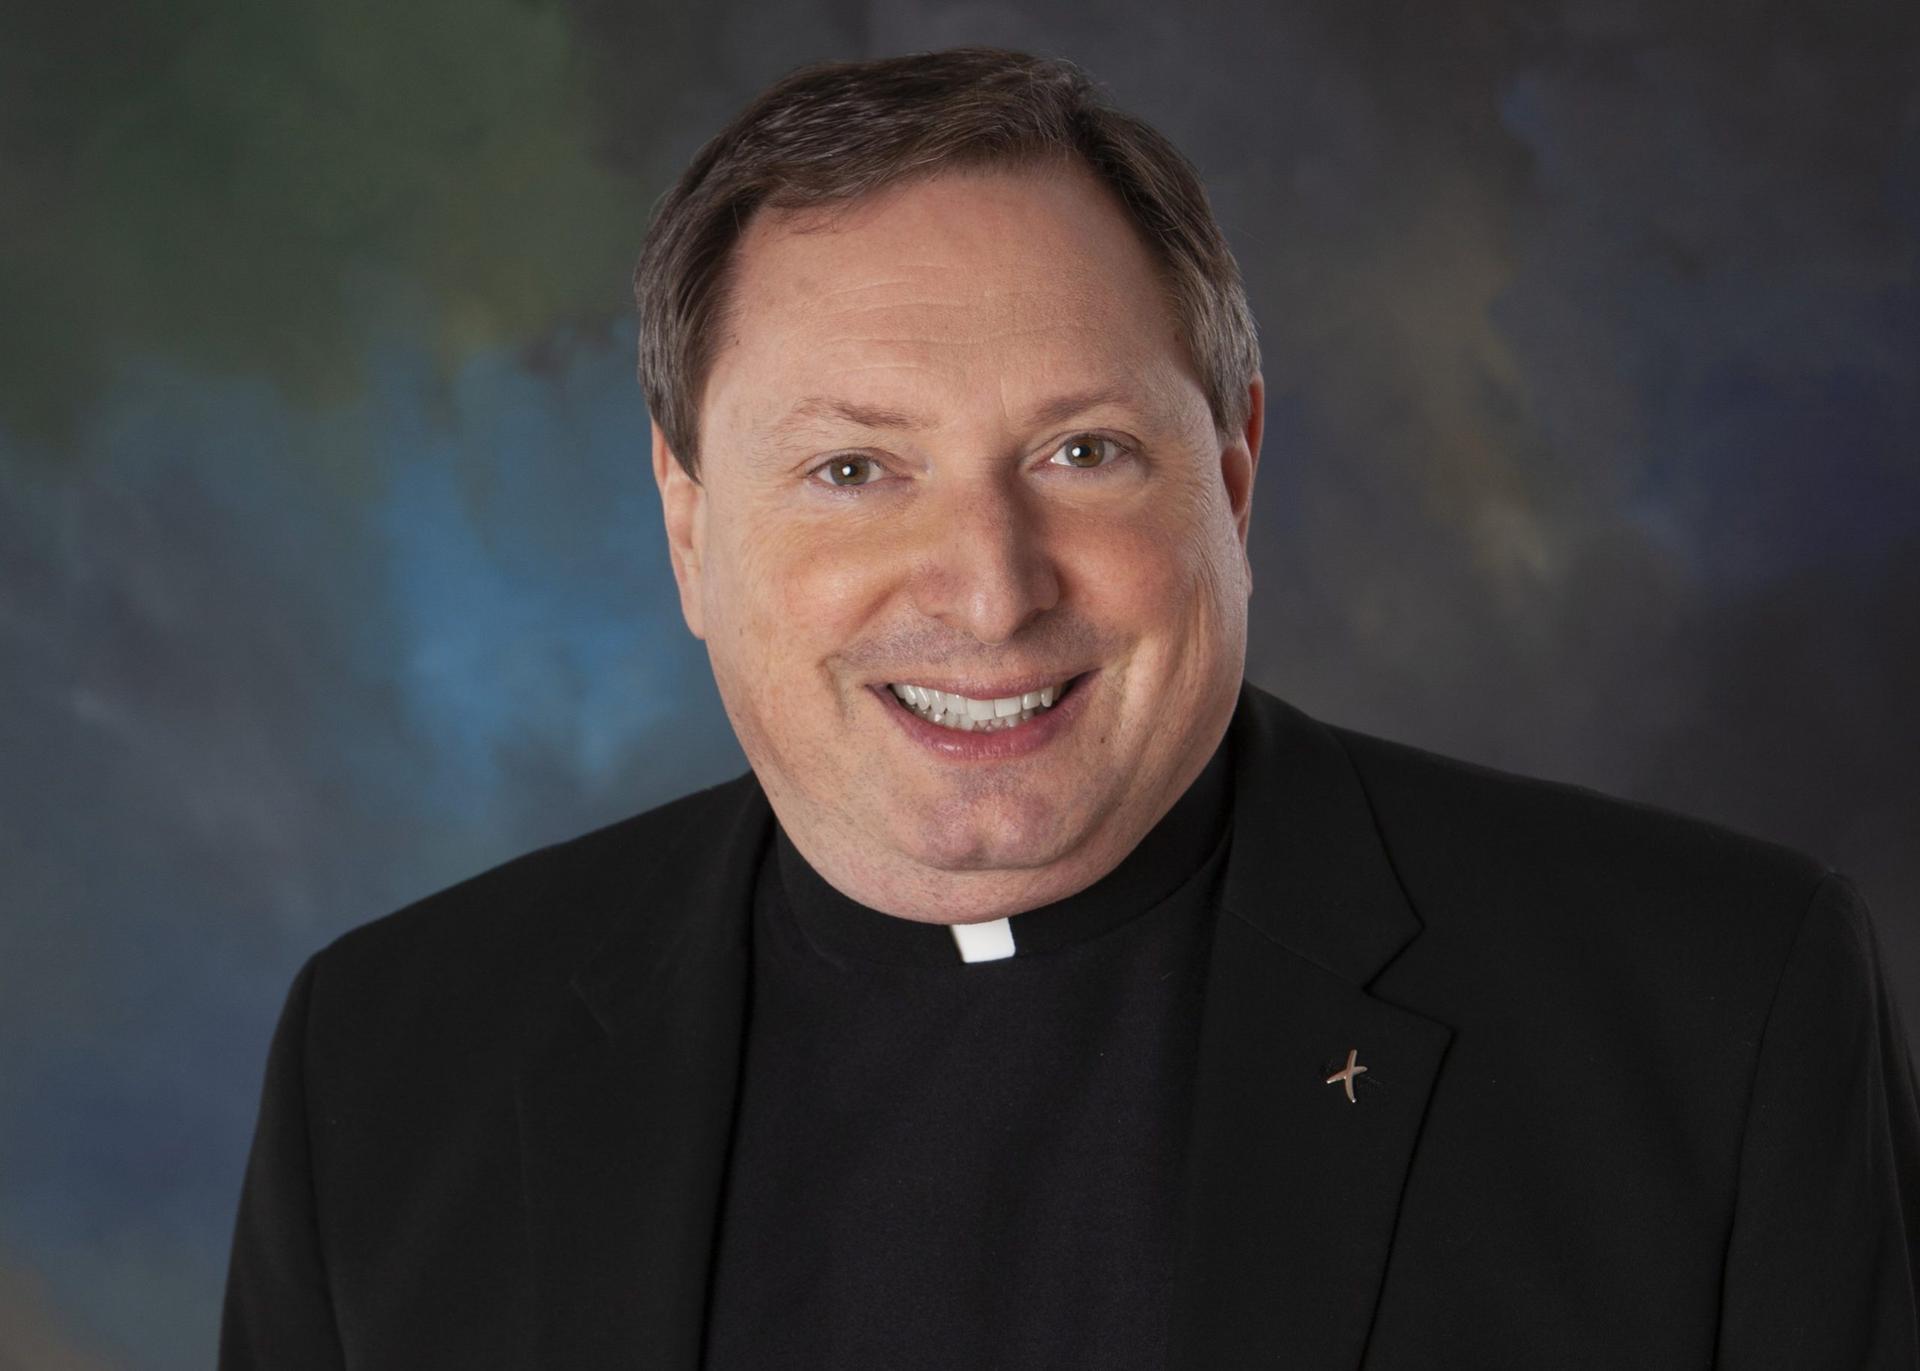 Pope Francis appoints administrator of Greensburg, Pa., to head the diocese